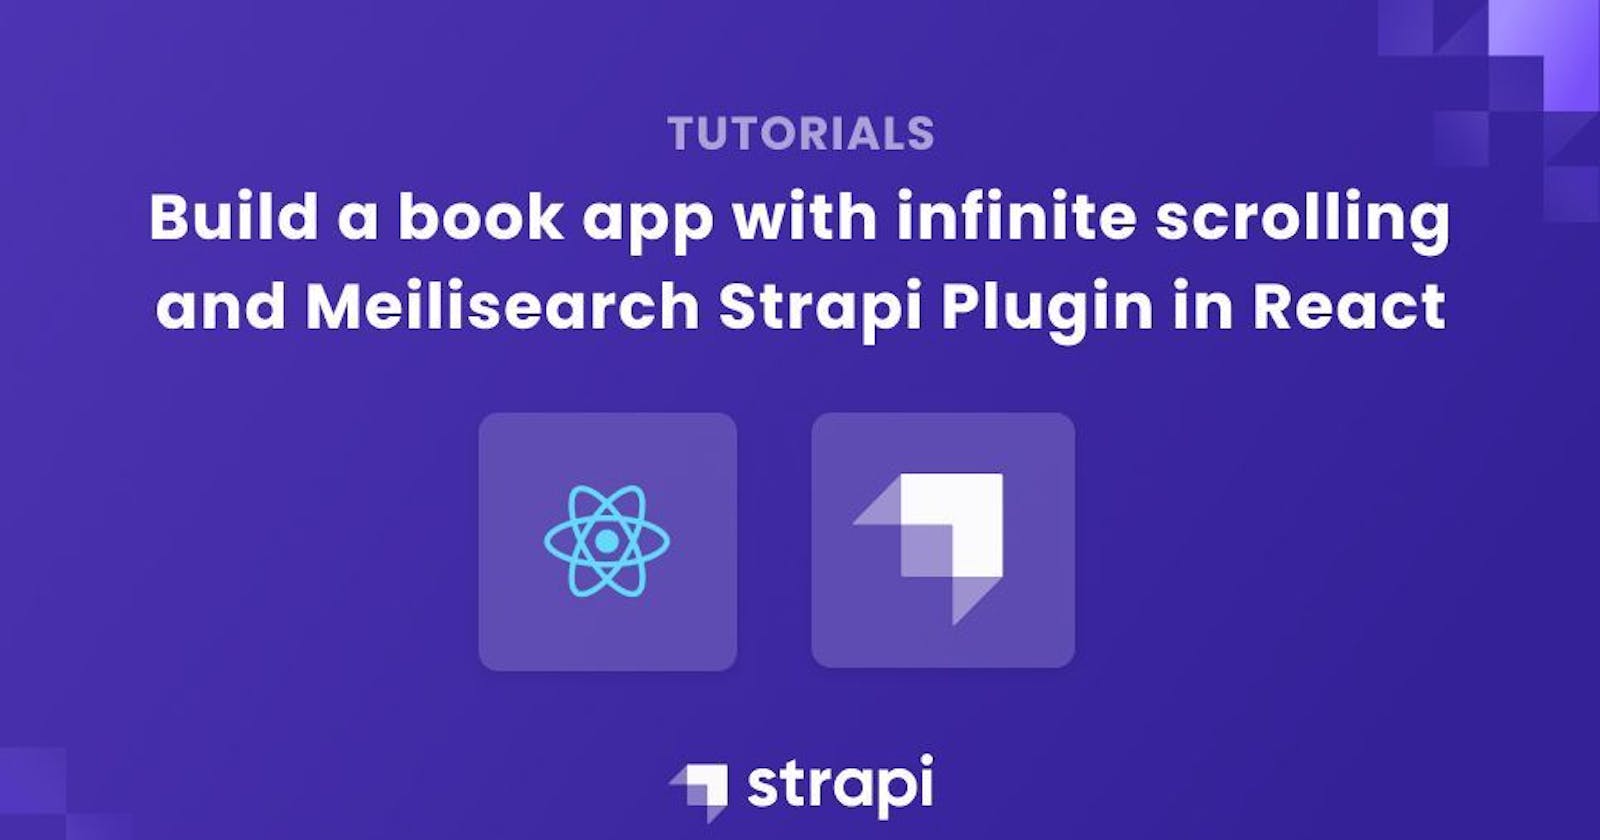 Build a Book App With Infinite Scrolling and Meilisearch Strapi Plugin in React